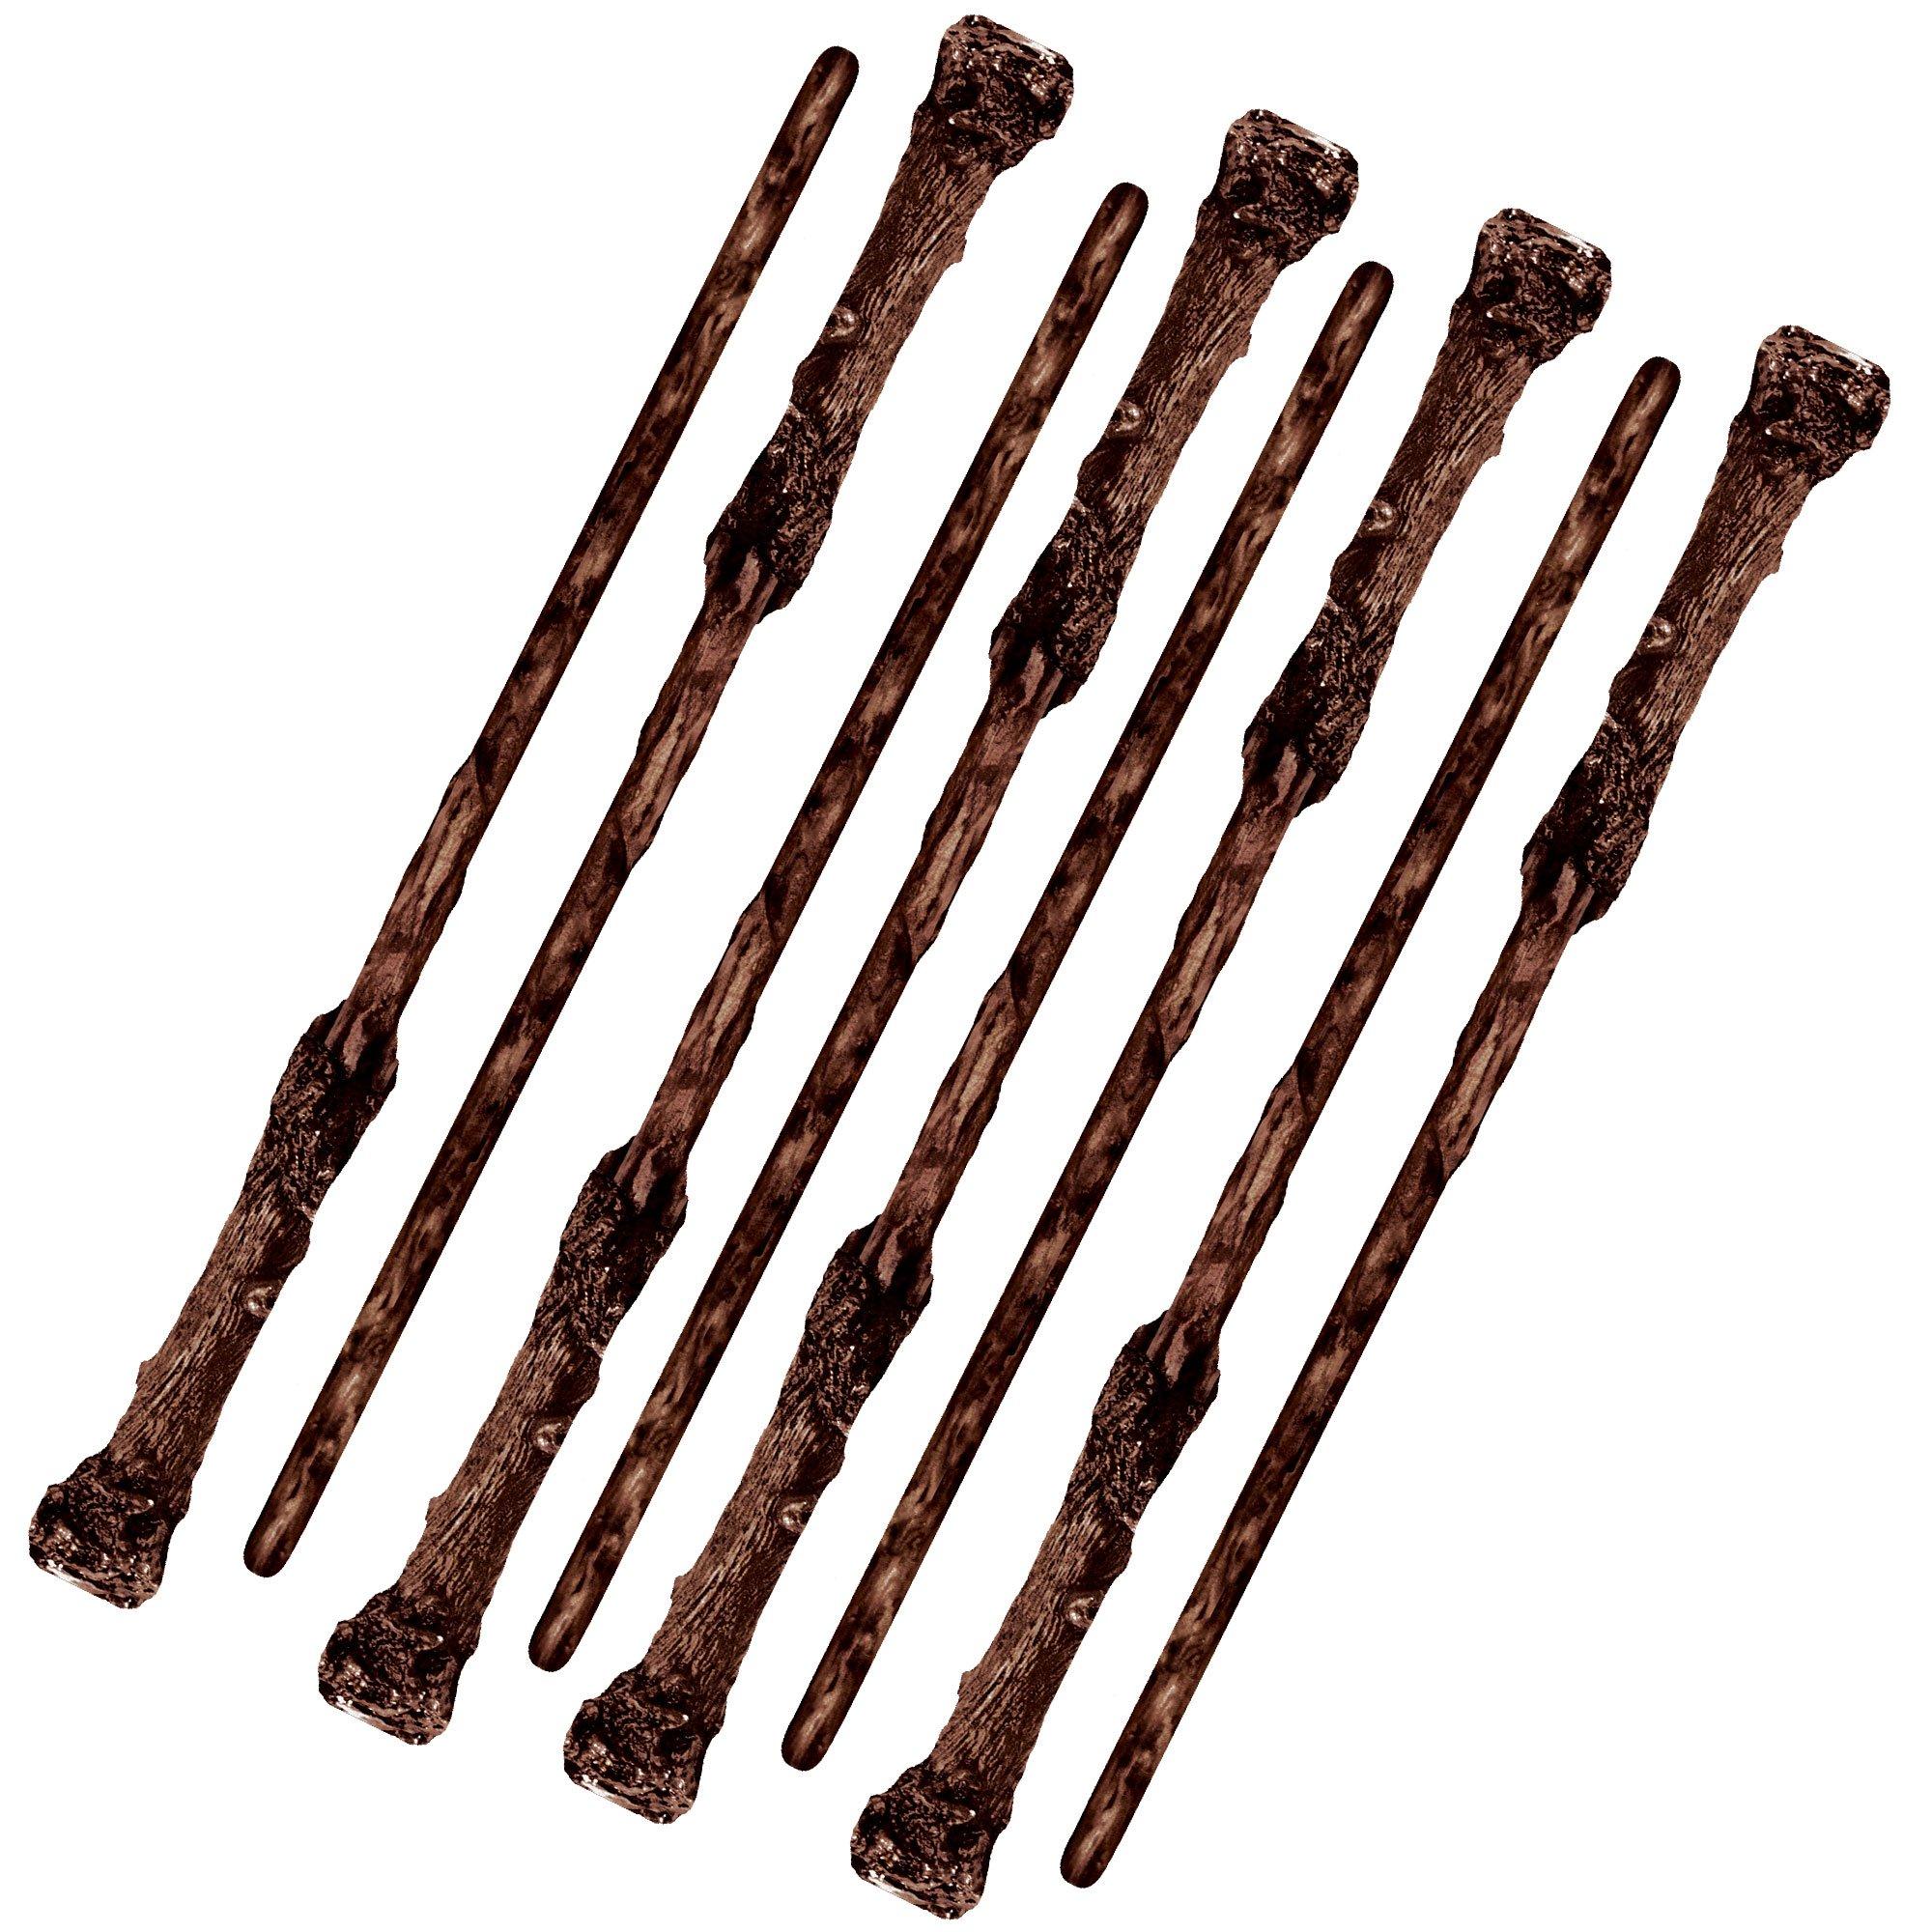 4-Pack Harry Potter Wizard Wands Kids Birthday Party Favors Prop